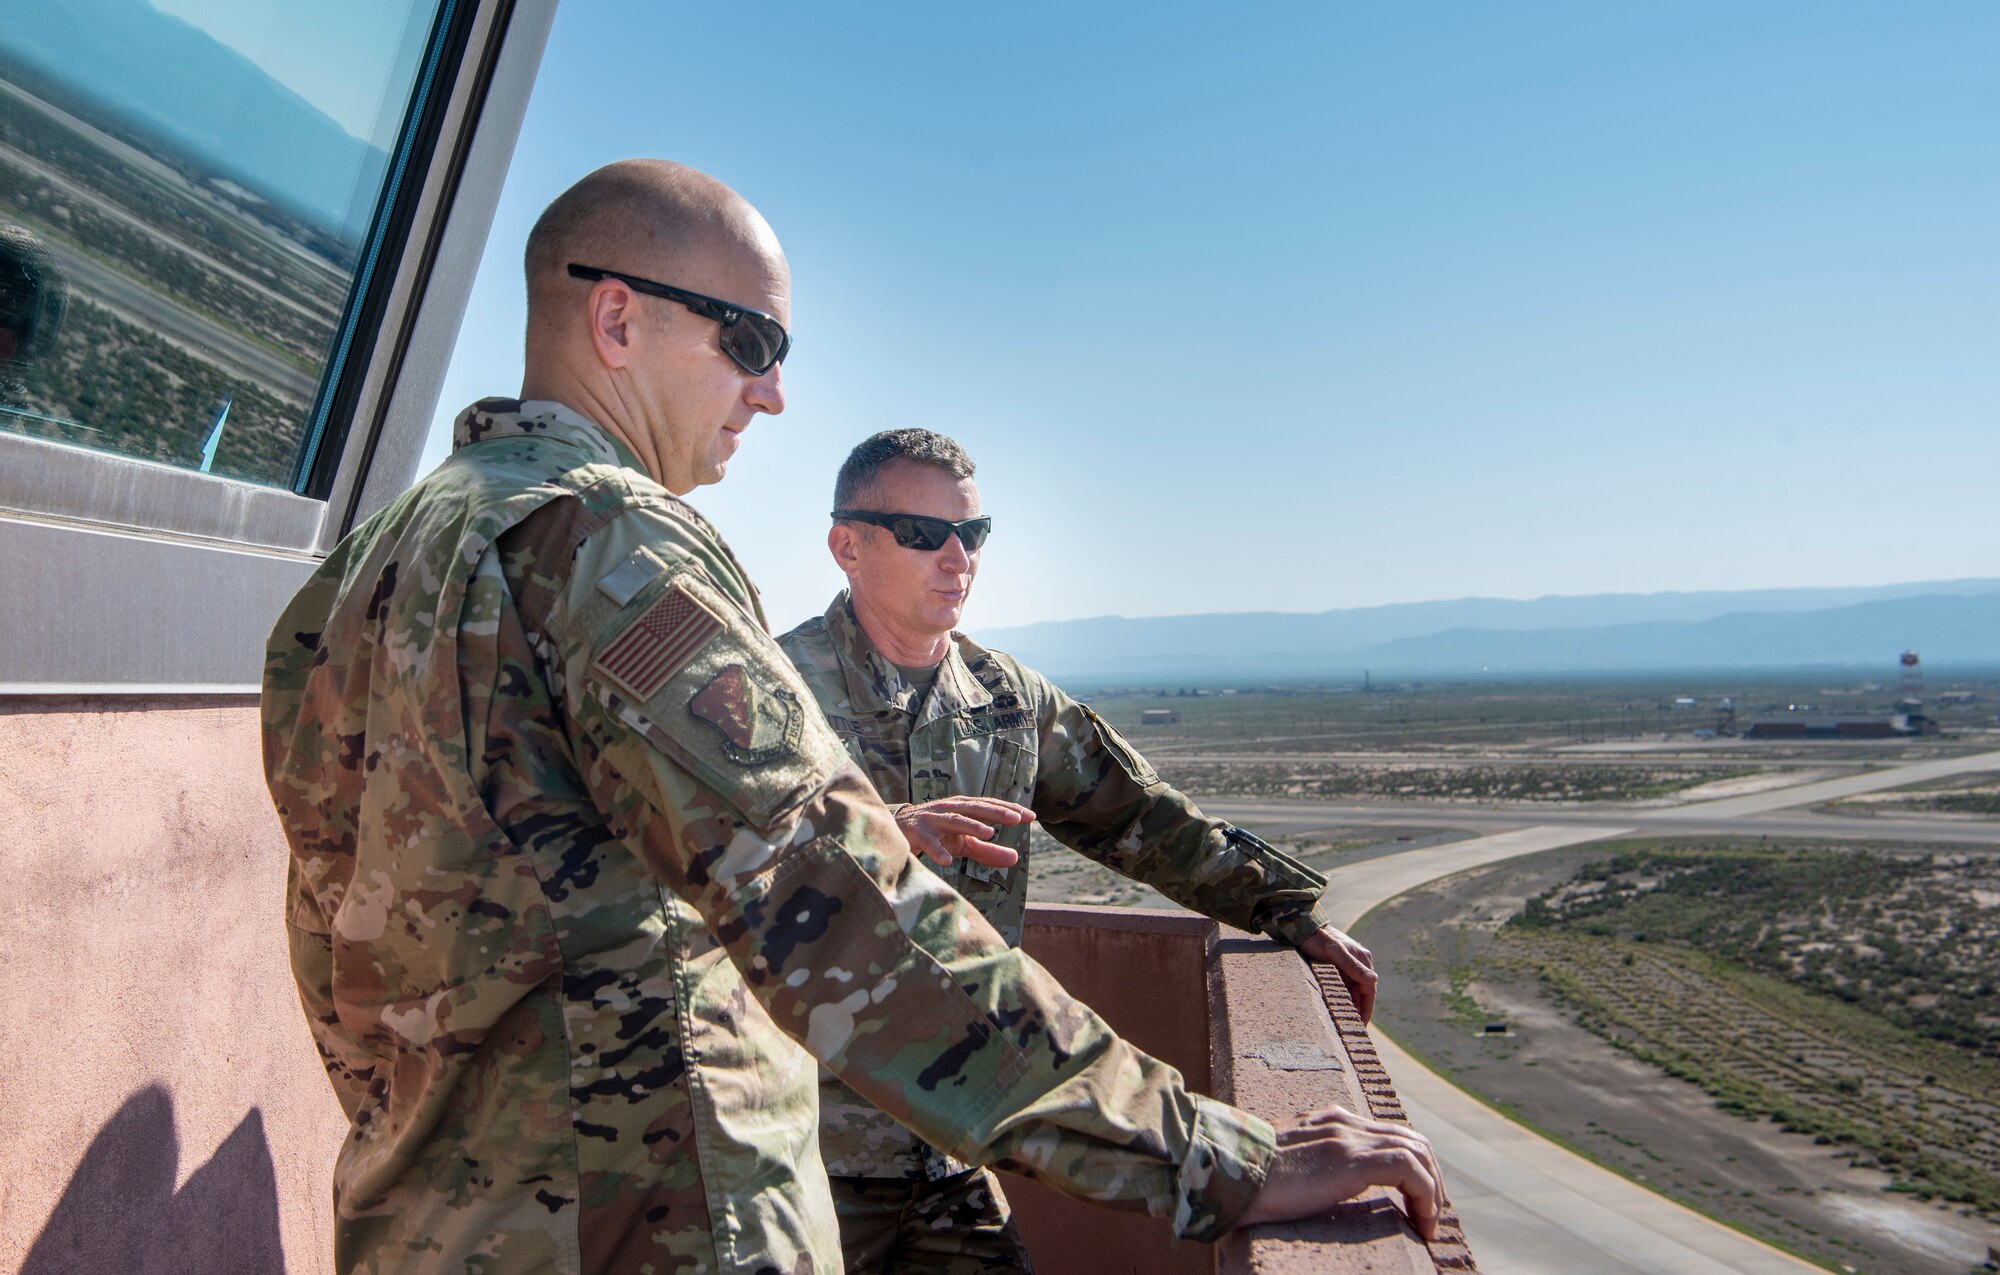 U.S. Air Force Col. Ryan Keeney, 49th Wing commander, and U.S. Army Brig. Gen. Eric Little, White Sands Missile Range commander, observe the airfield July 9, 2021, on Holloman Air Force Base, New Mexico. Little visited Holloman AFB to familiarize with local operations and tour partner units. (U.S. Air Force photo by Airman 1st Class Jessica Sanchez)